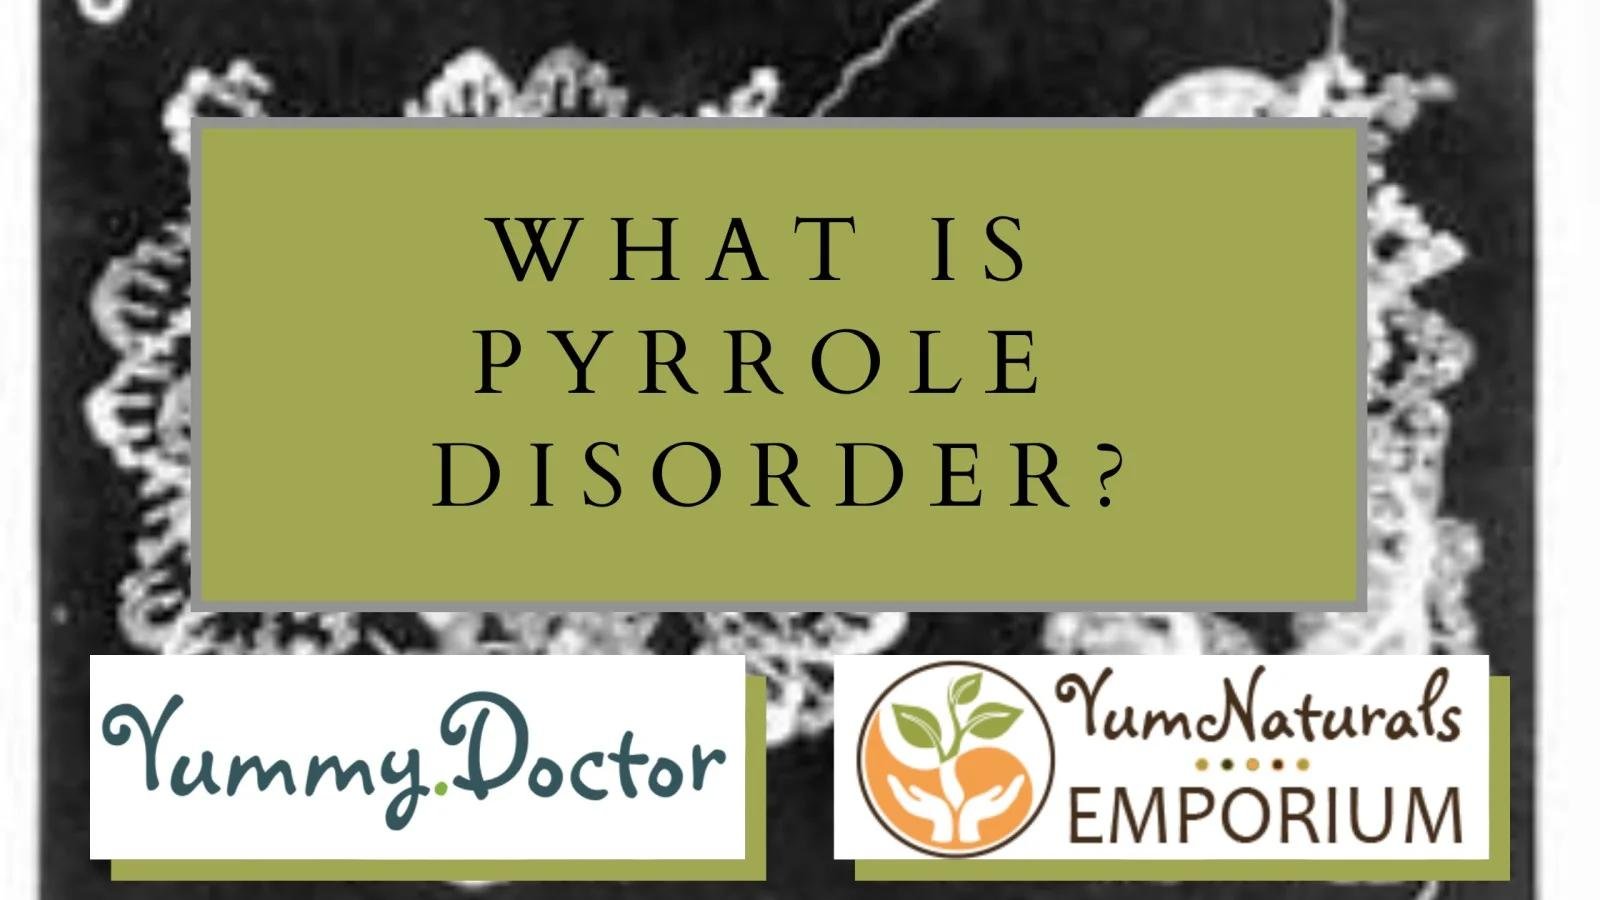 Yummy_Doctor_Holistic_Health_Education_-_Blog_-_What_Is_Pyrrole_Disorder